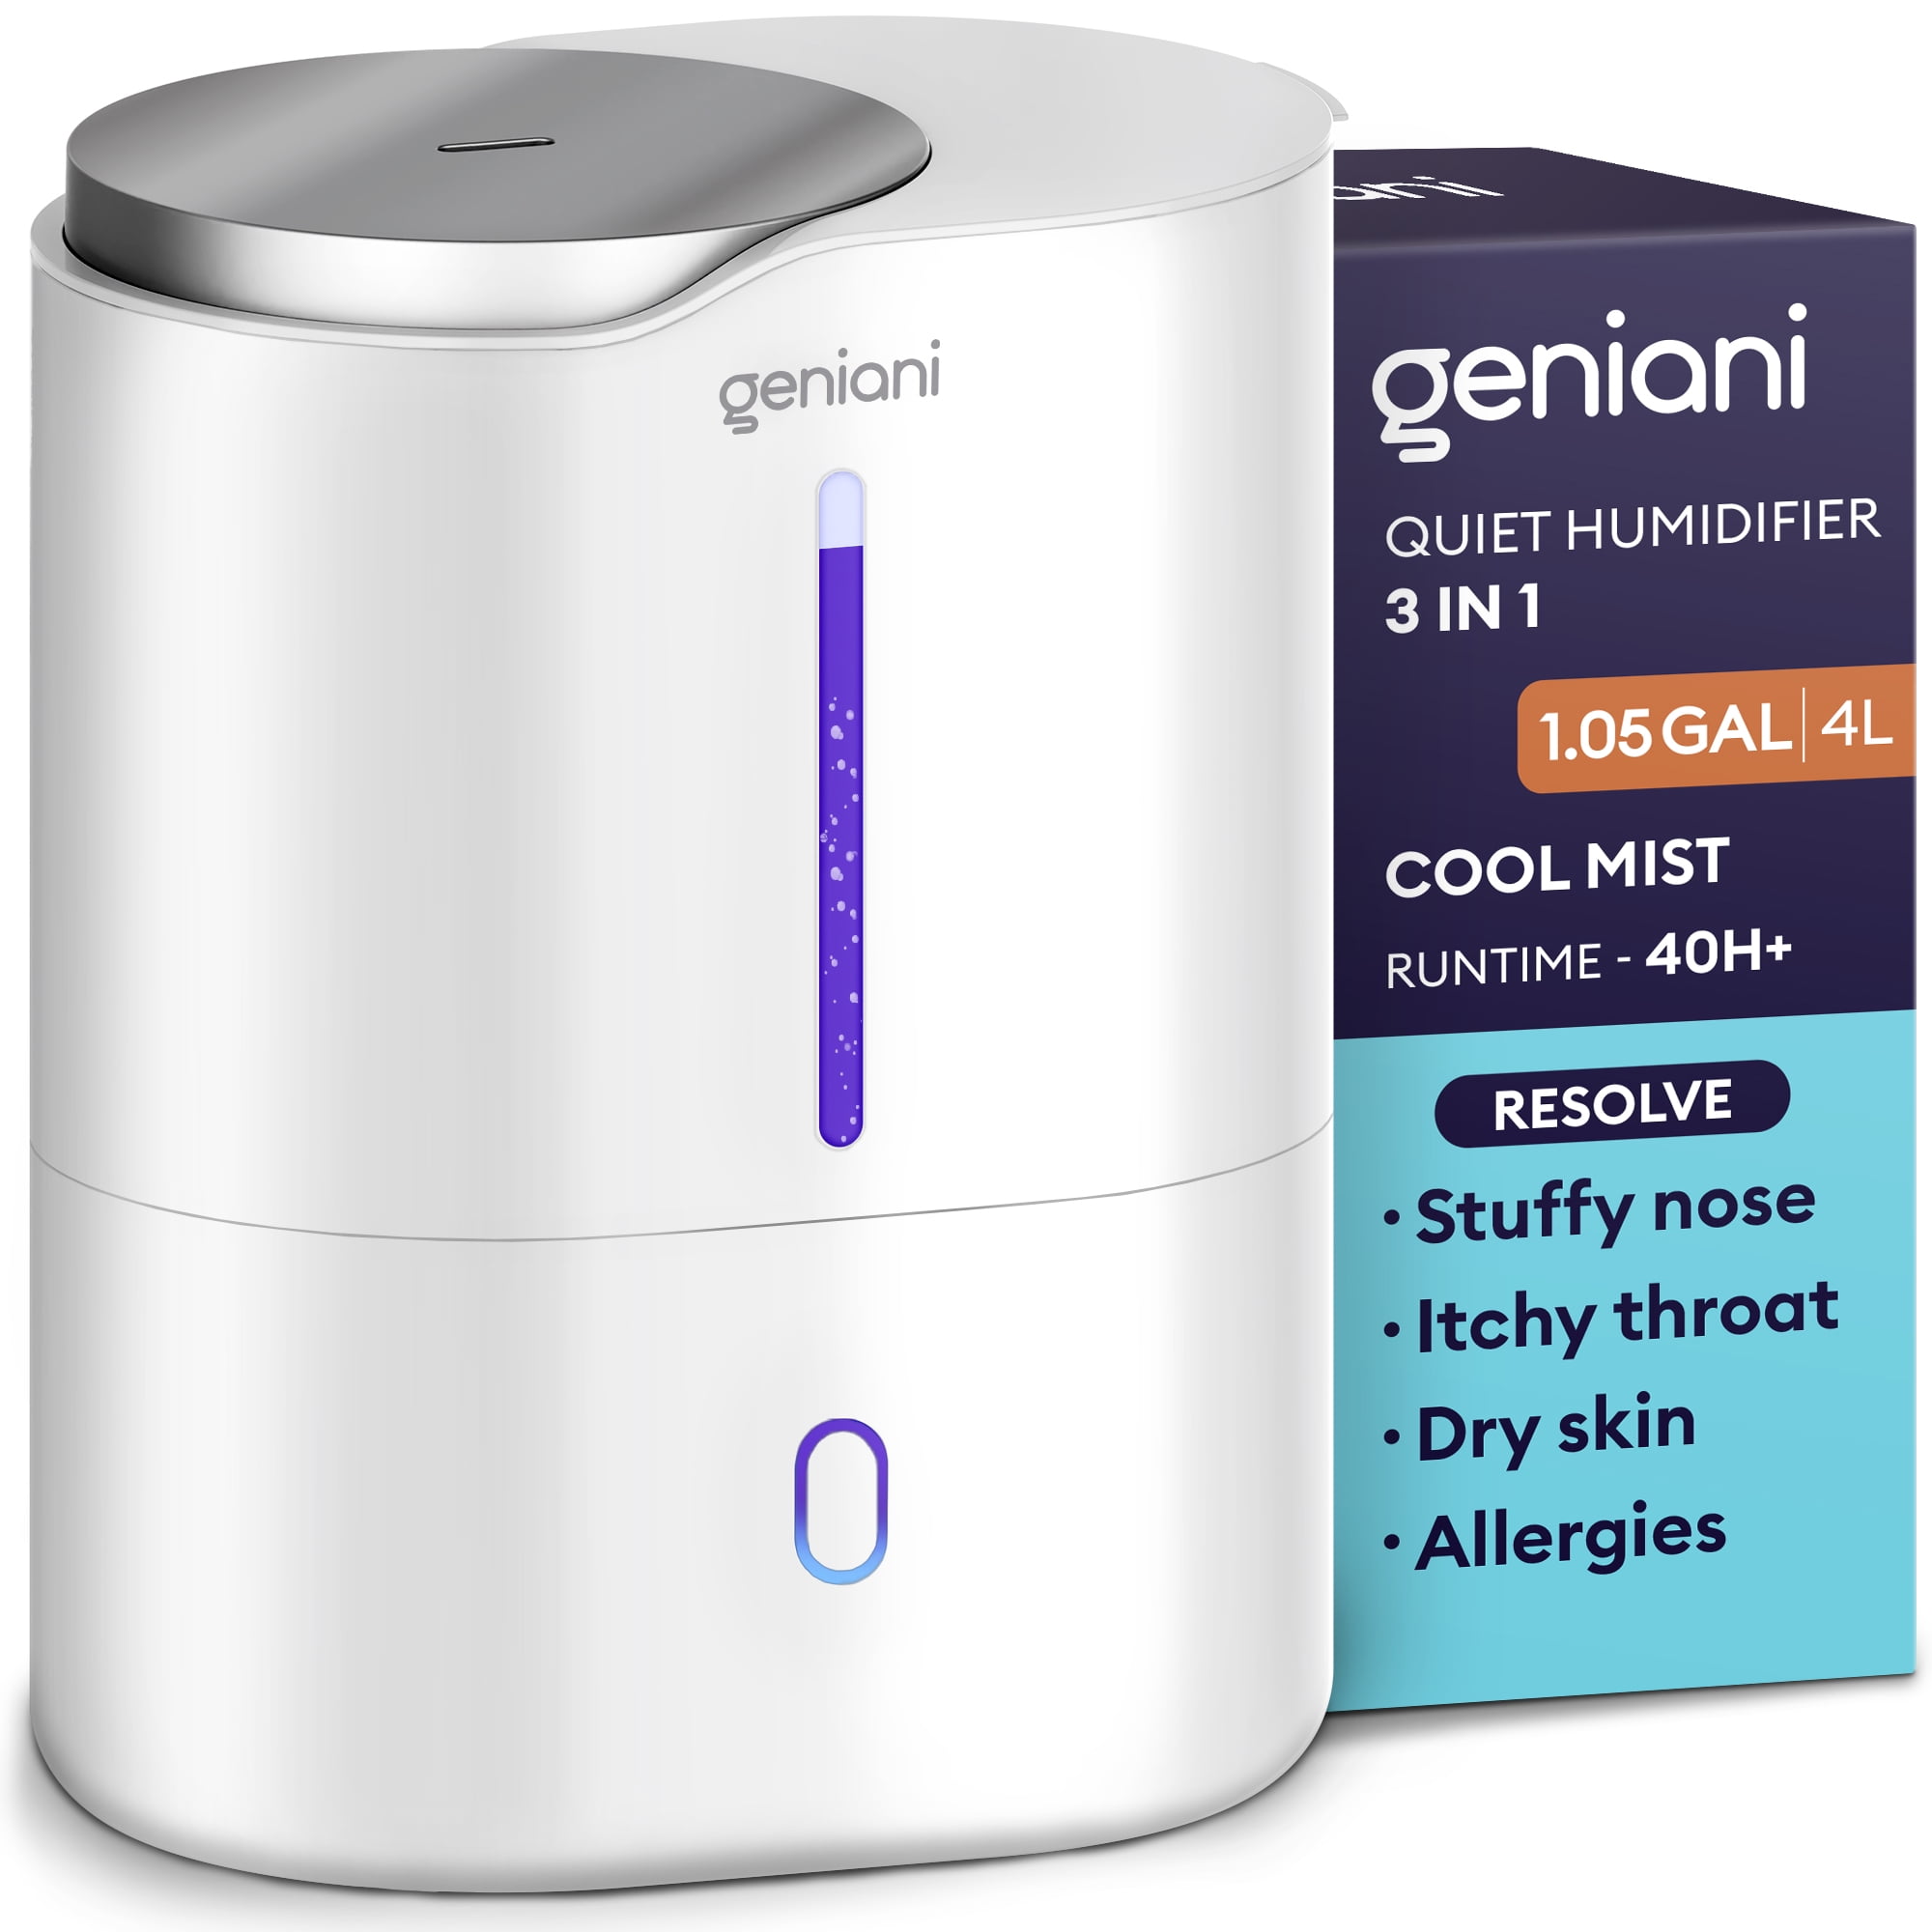 𝐋𝐚𝐫𝐠𝐞 𝐂𝐚𝐩𝐚𝐜𝐢𝐭𝐲 Top Fill Cool Mist Large Humidifier